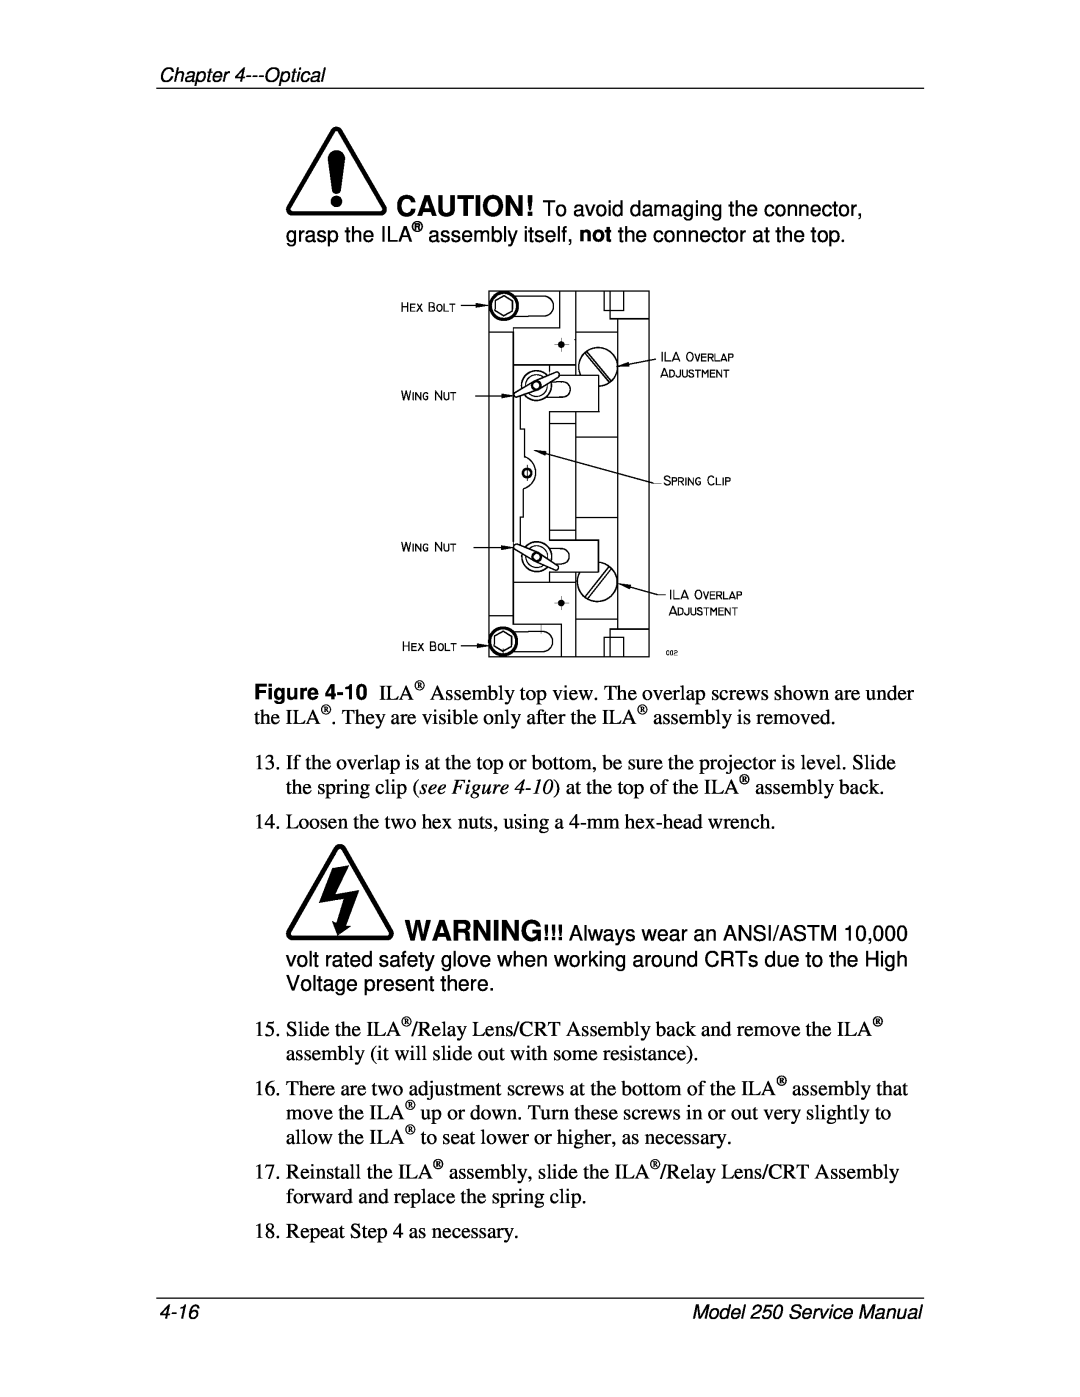 JVC 250 service manual Loosen the two hex nuts, using a 4-mm hex-head wrench 